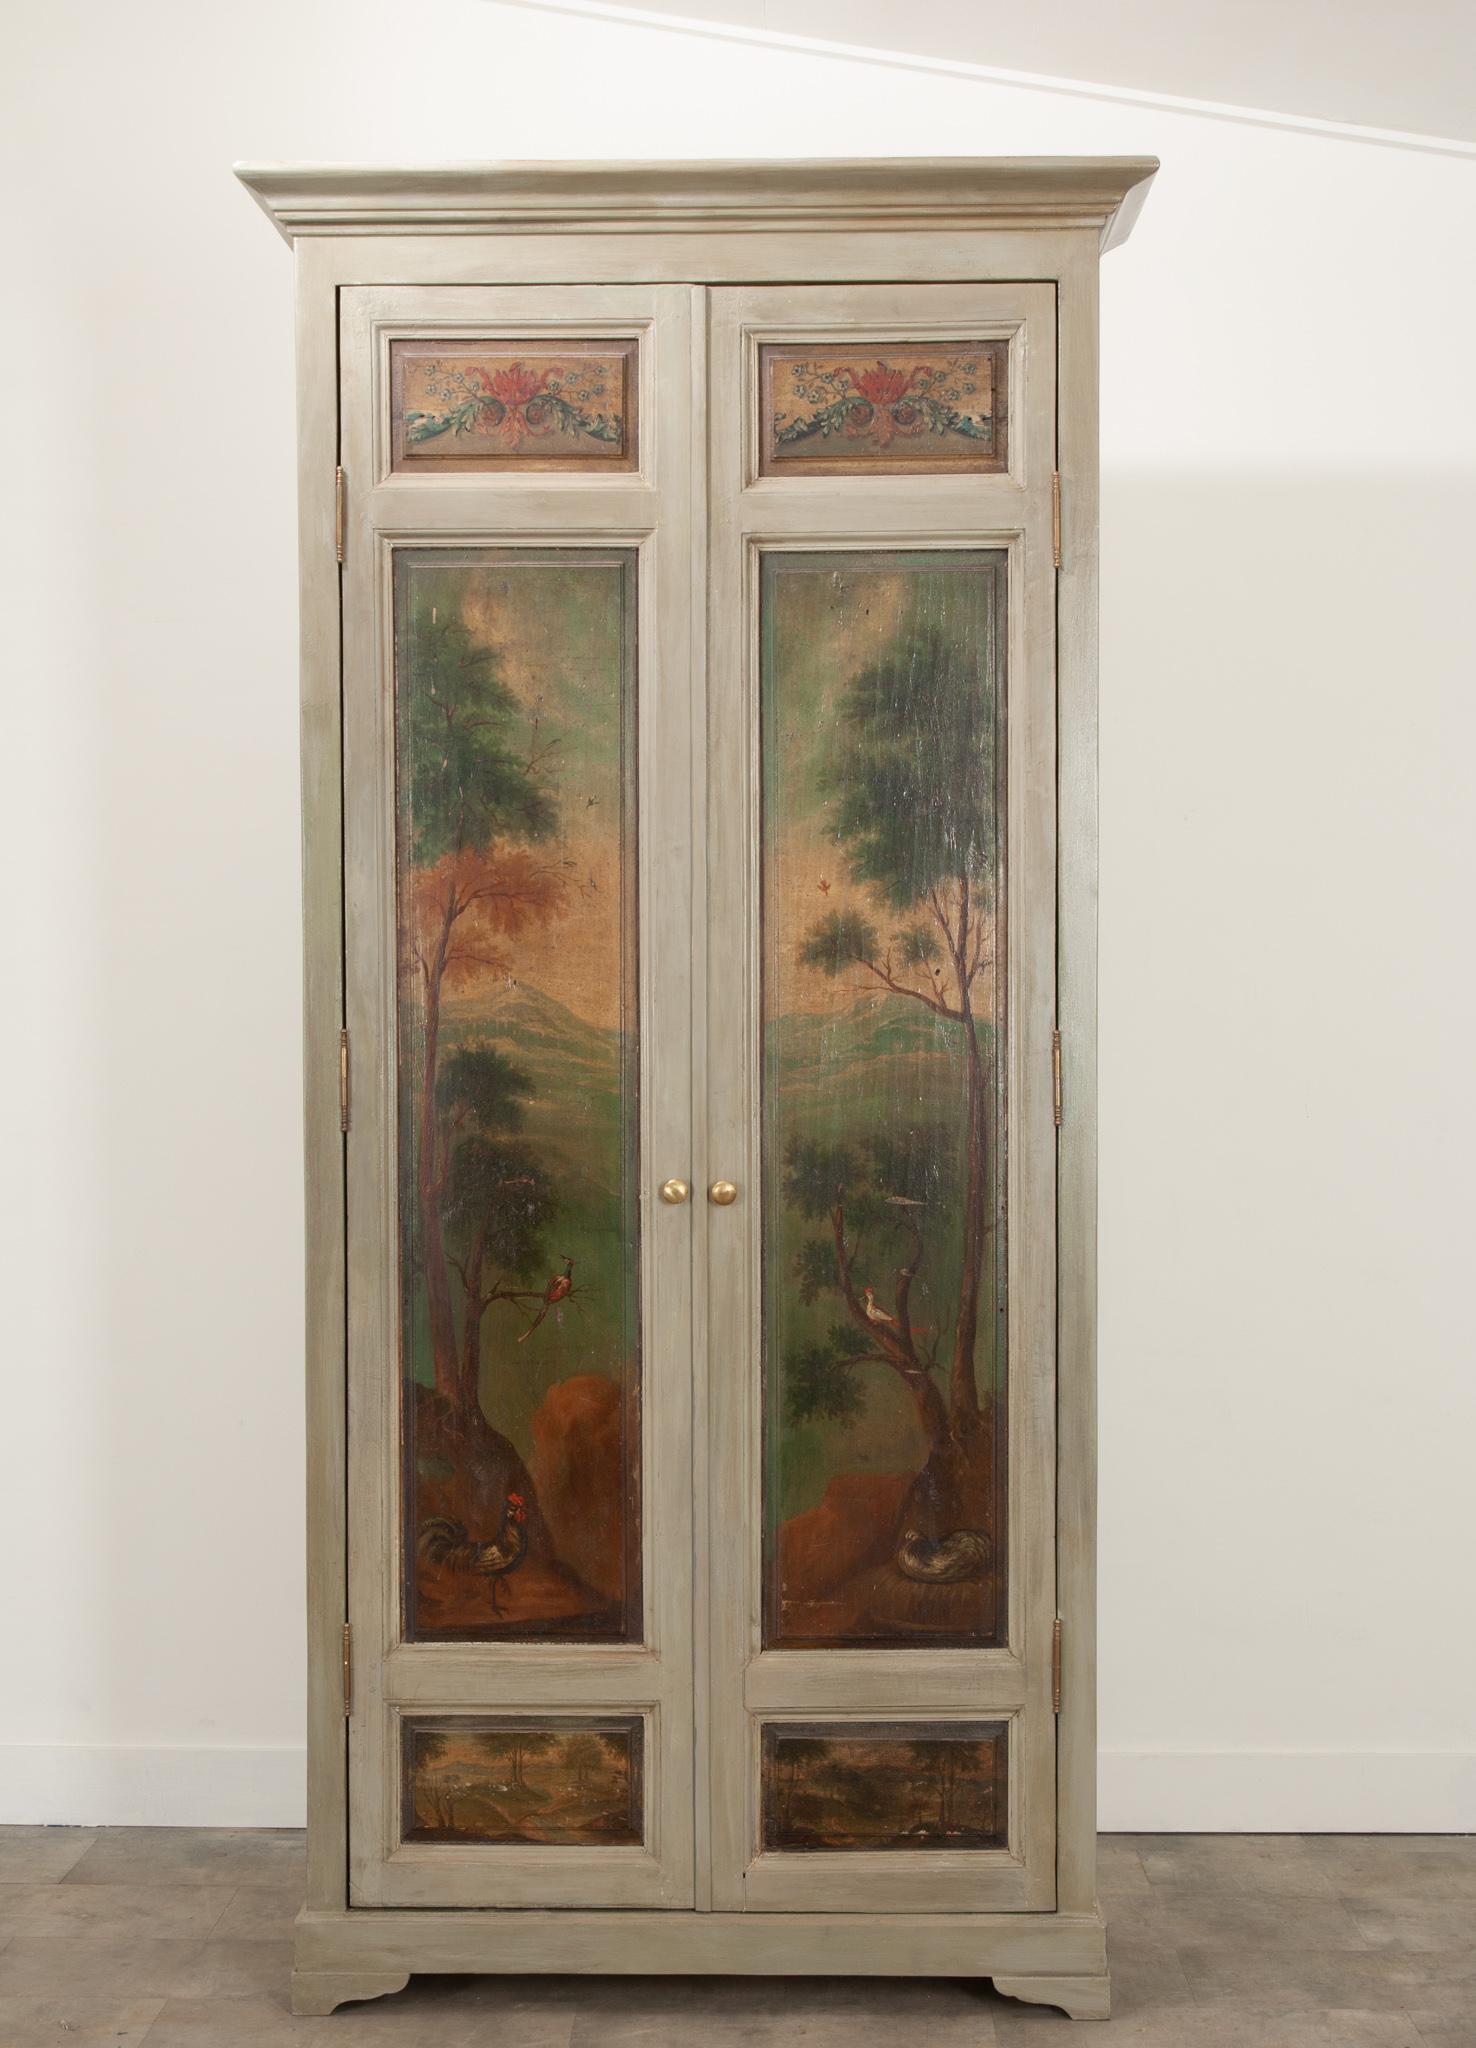 This one of a kind armoire was custom made to showcase the fabulous pair of 19th century painted boiserie panels that now serve as the doors. Boiserie panels rose in popularity during the 18th century as a way to emulate the grandeur of the French